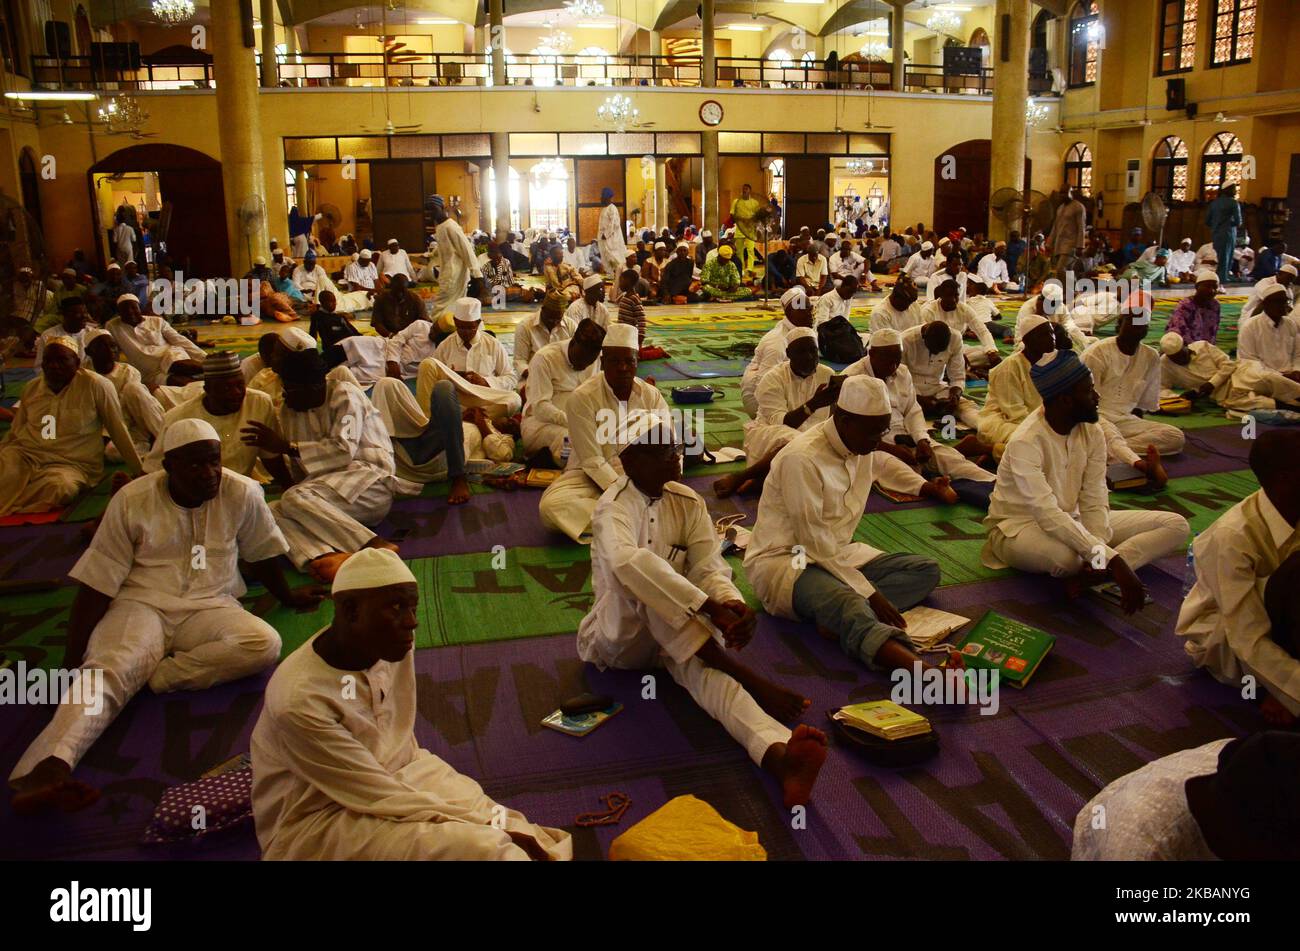 Worshipers at the Lagos State Secretariat Central Mosque shrine in Lagos, Nigeria, in celebrating of el Maulud on 10 November 2019. Eid el Maulud is the birthday of the Holy Prophet Muhammad, the day ia marked every 12th of Rabi'ul Awwal of the Islamic calendar. The teaching of Islam is centered on belief in God, devotion and service to humanity. (Photo by Olukayode Jaiyeola/NurPhoto) Stock Photo